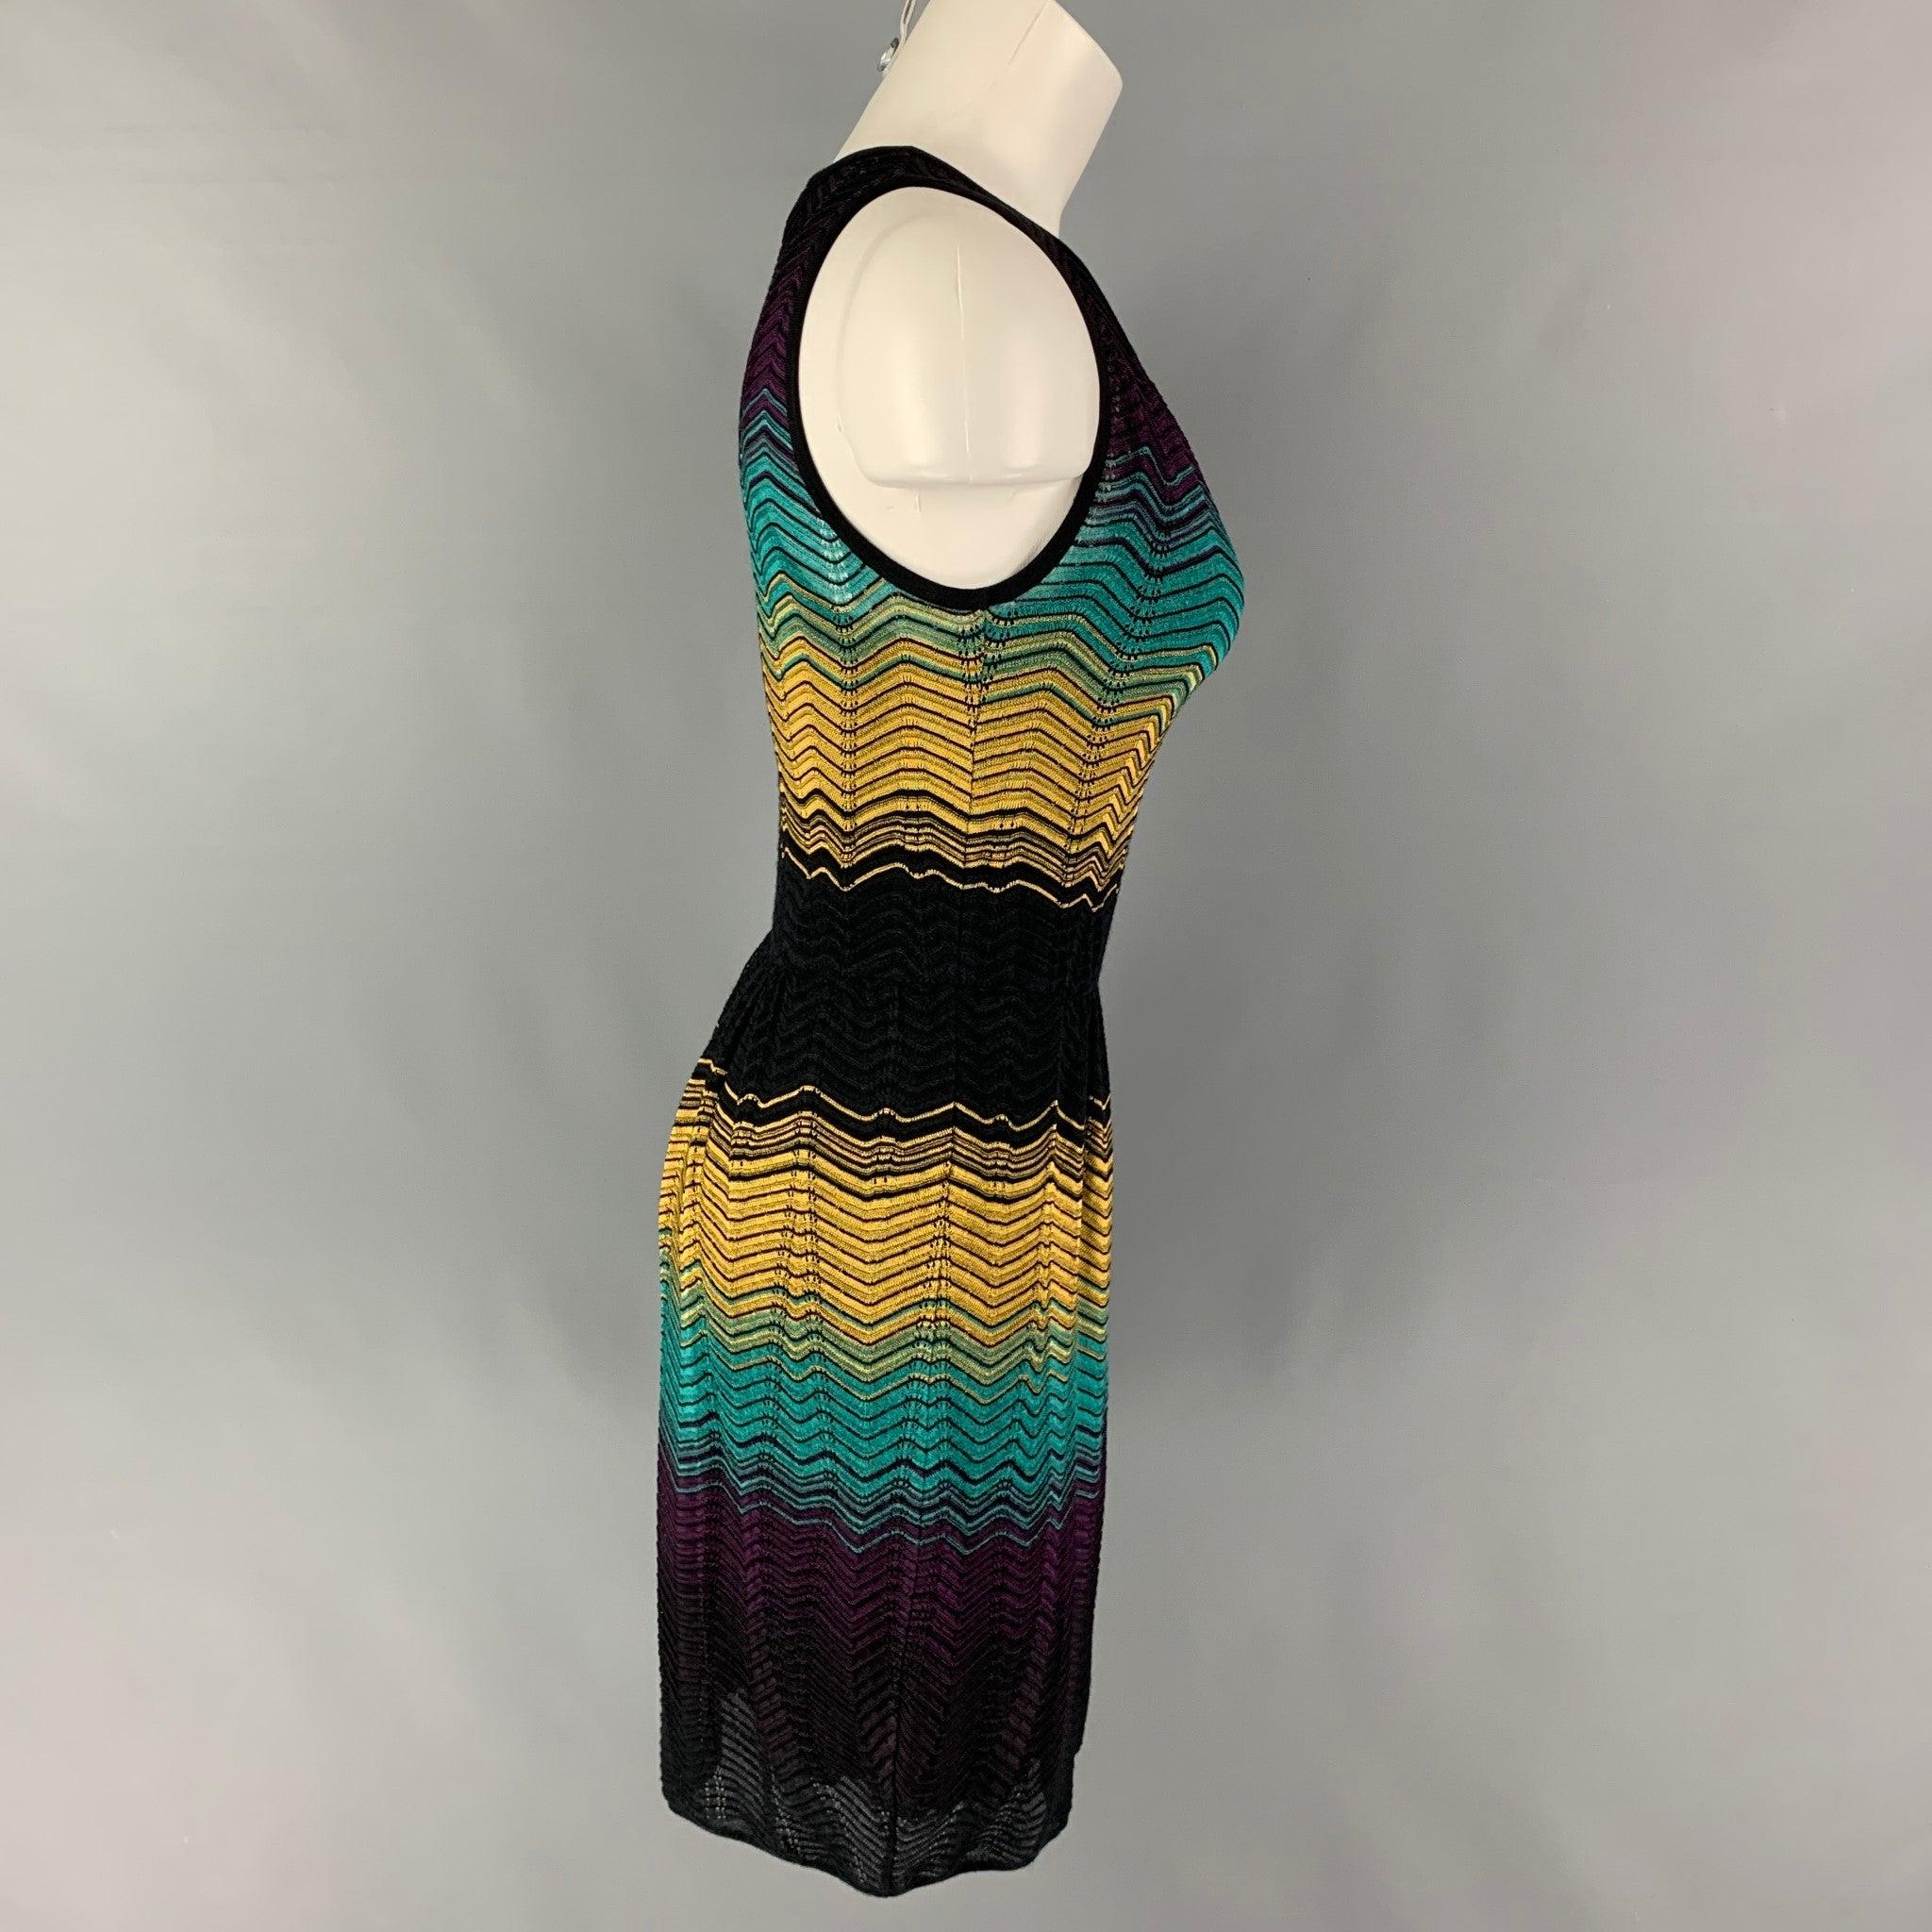 M MISSONI dress comes in a multi-color zig zag viscose blend featuring a a-line style, sleeveless, and a elastic waist.
New with tags.
 

Marked:   42 

Measurements: 
 
Shoulder:
9.5 inches  Bust: 28 inches  Waist: 24 inches  Hip: 36 inches 